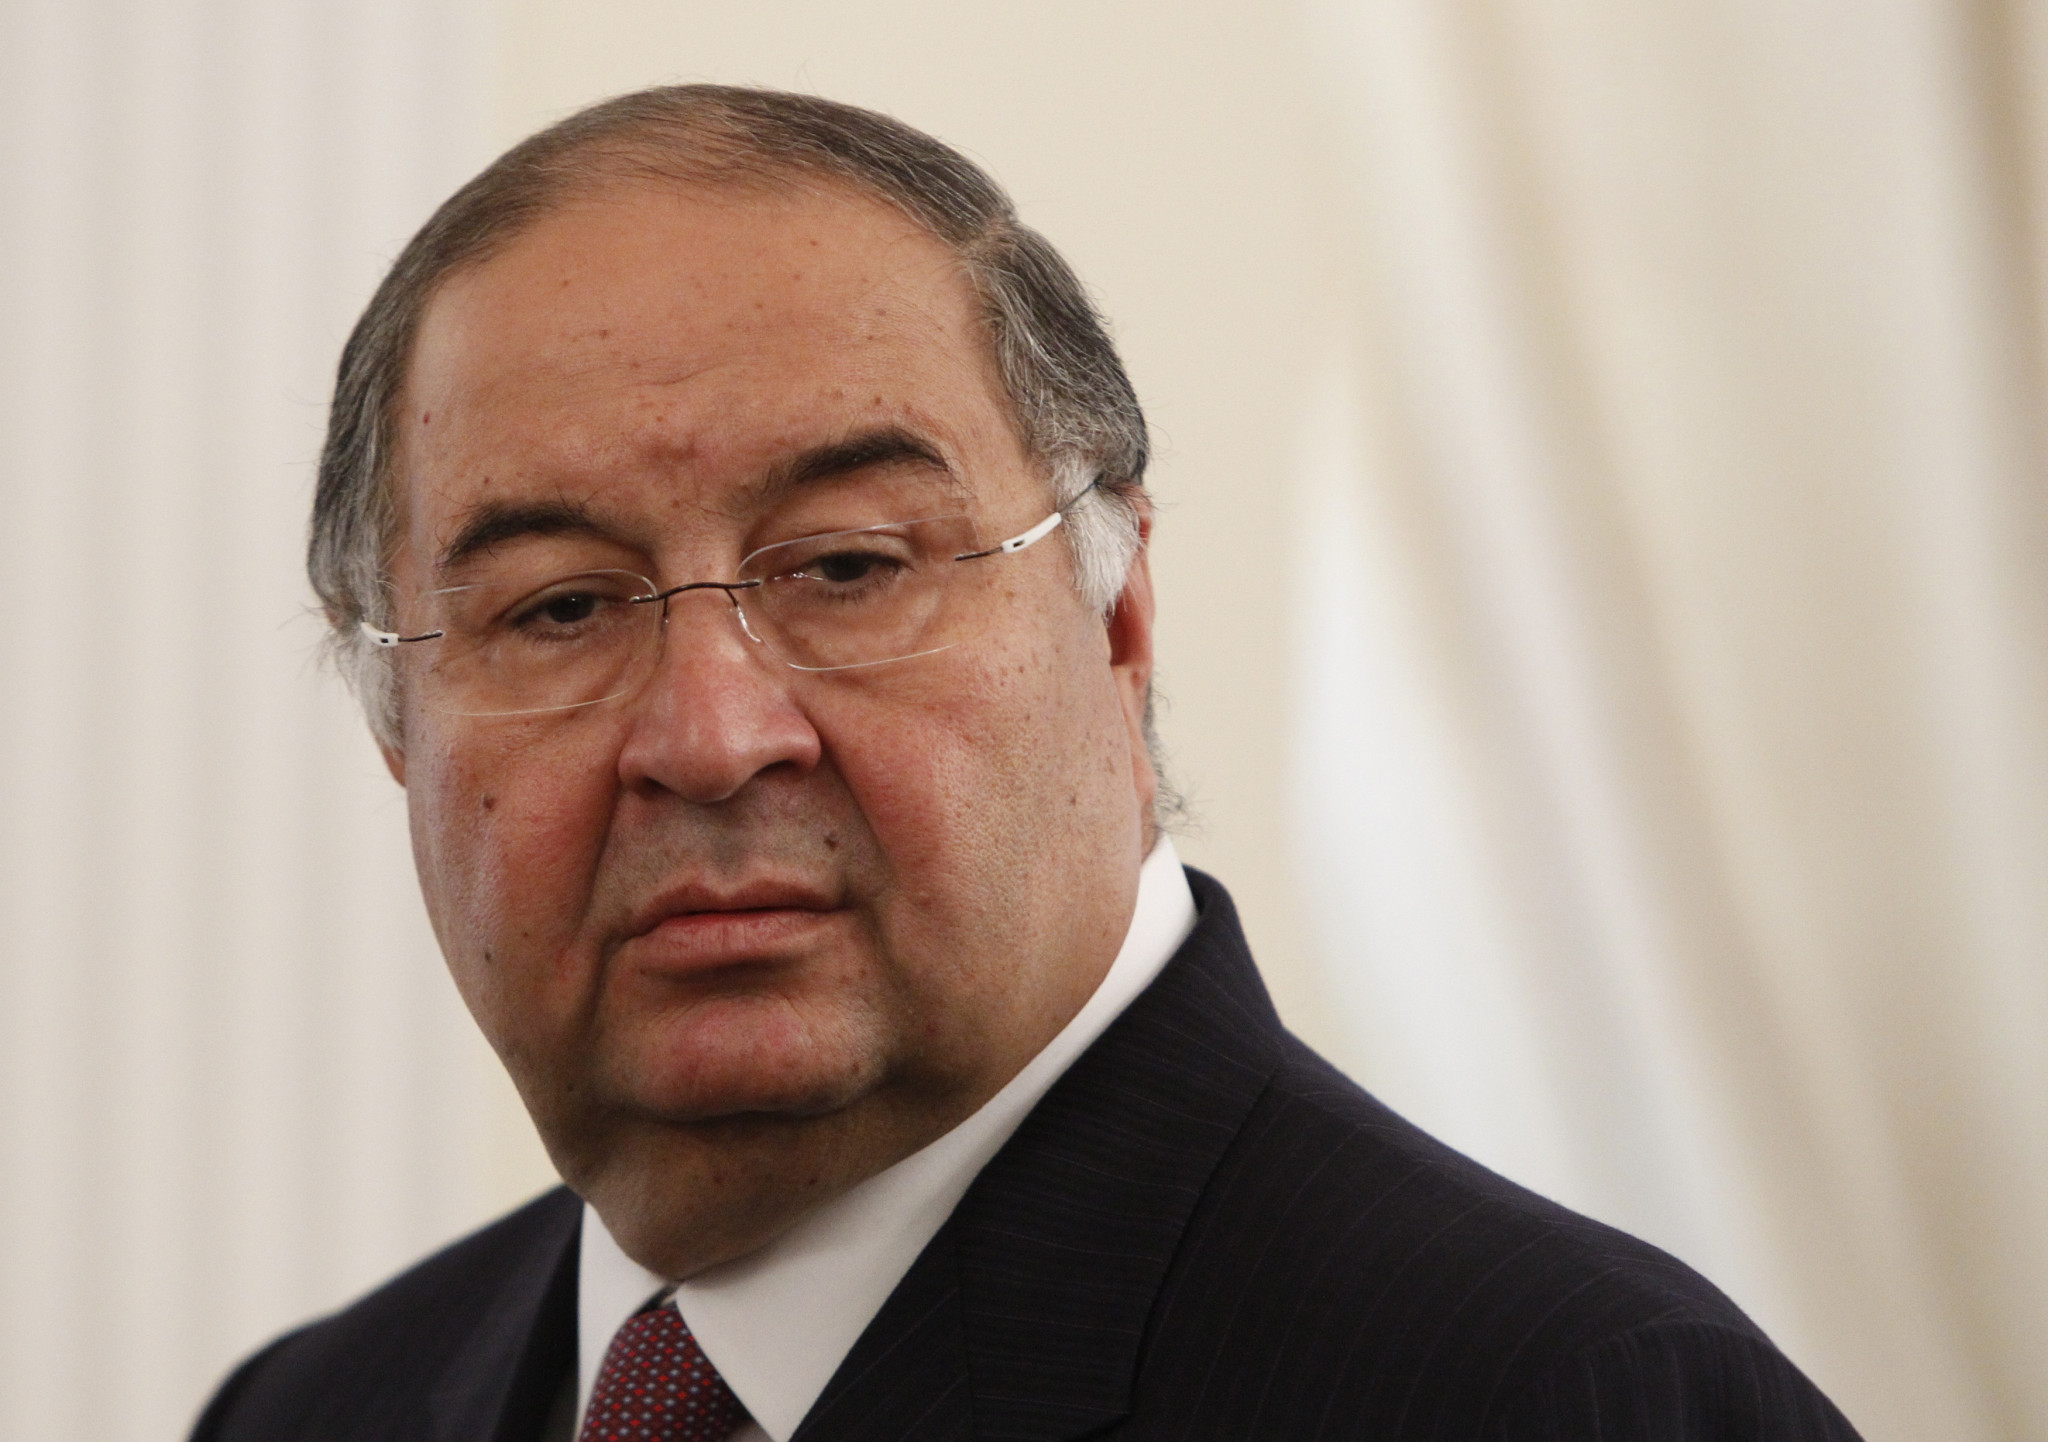 Alisher Usmanov has been sanctioned by the UK Government following Russia's invasion of Ukraine ©Getty Images